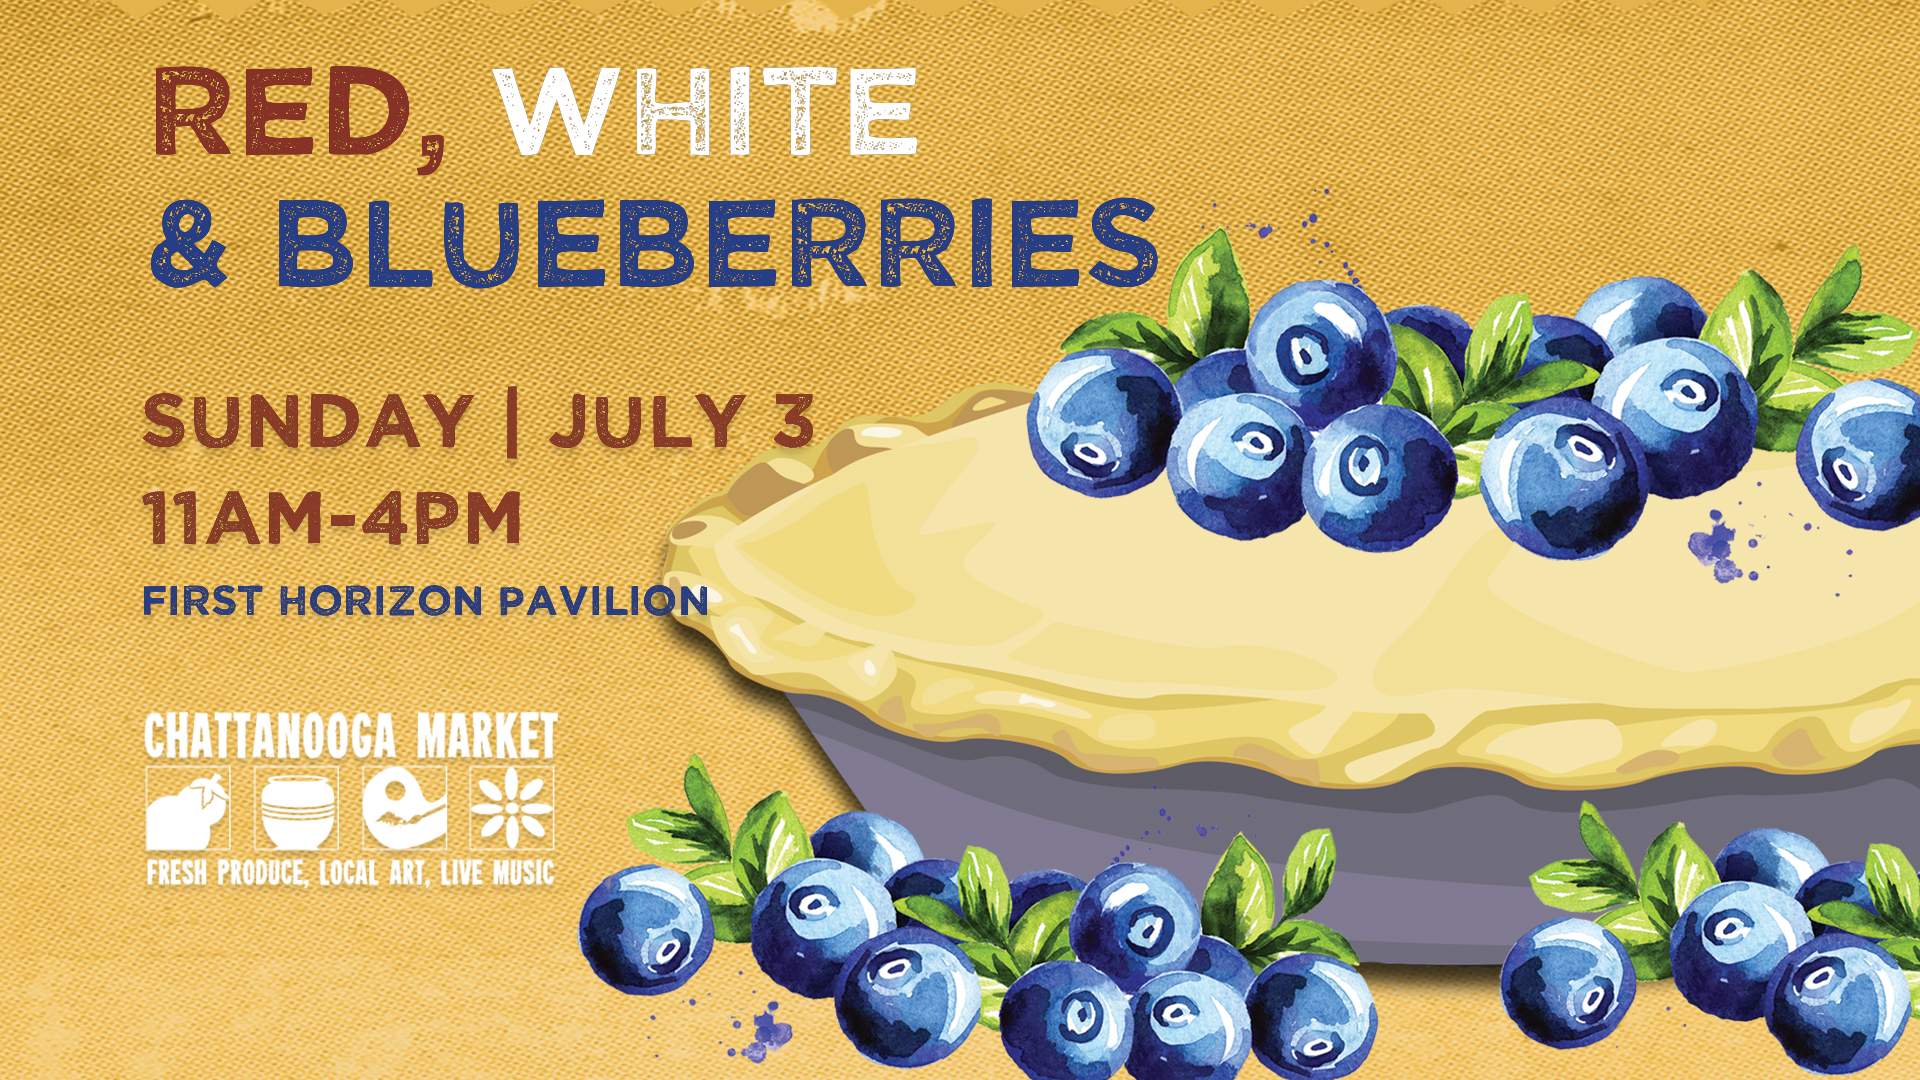 We’re All About Blueberries This Sunday!